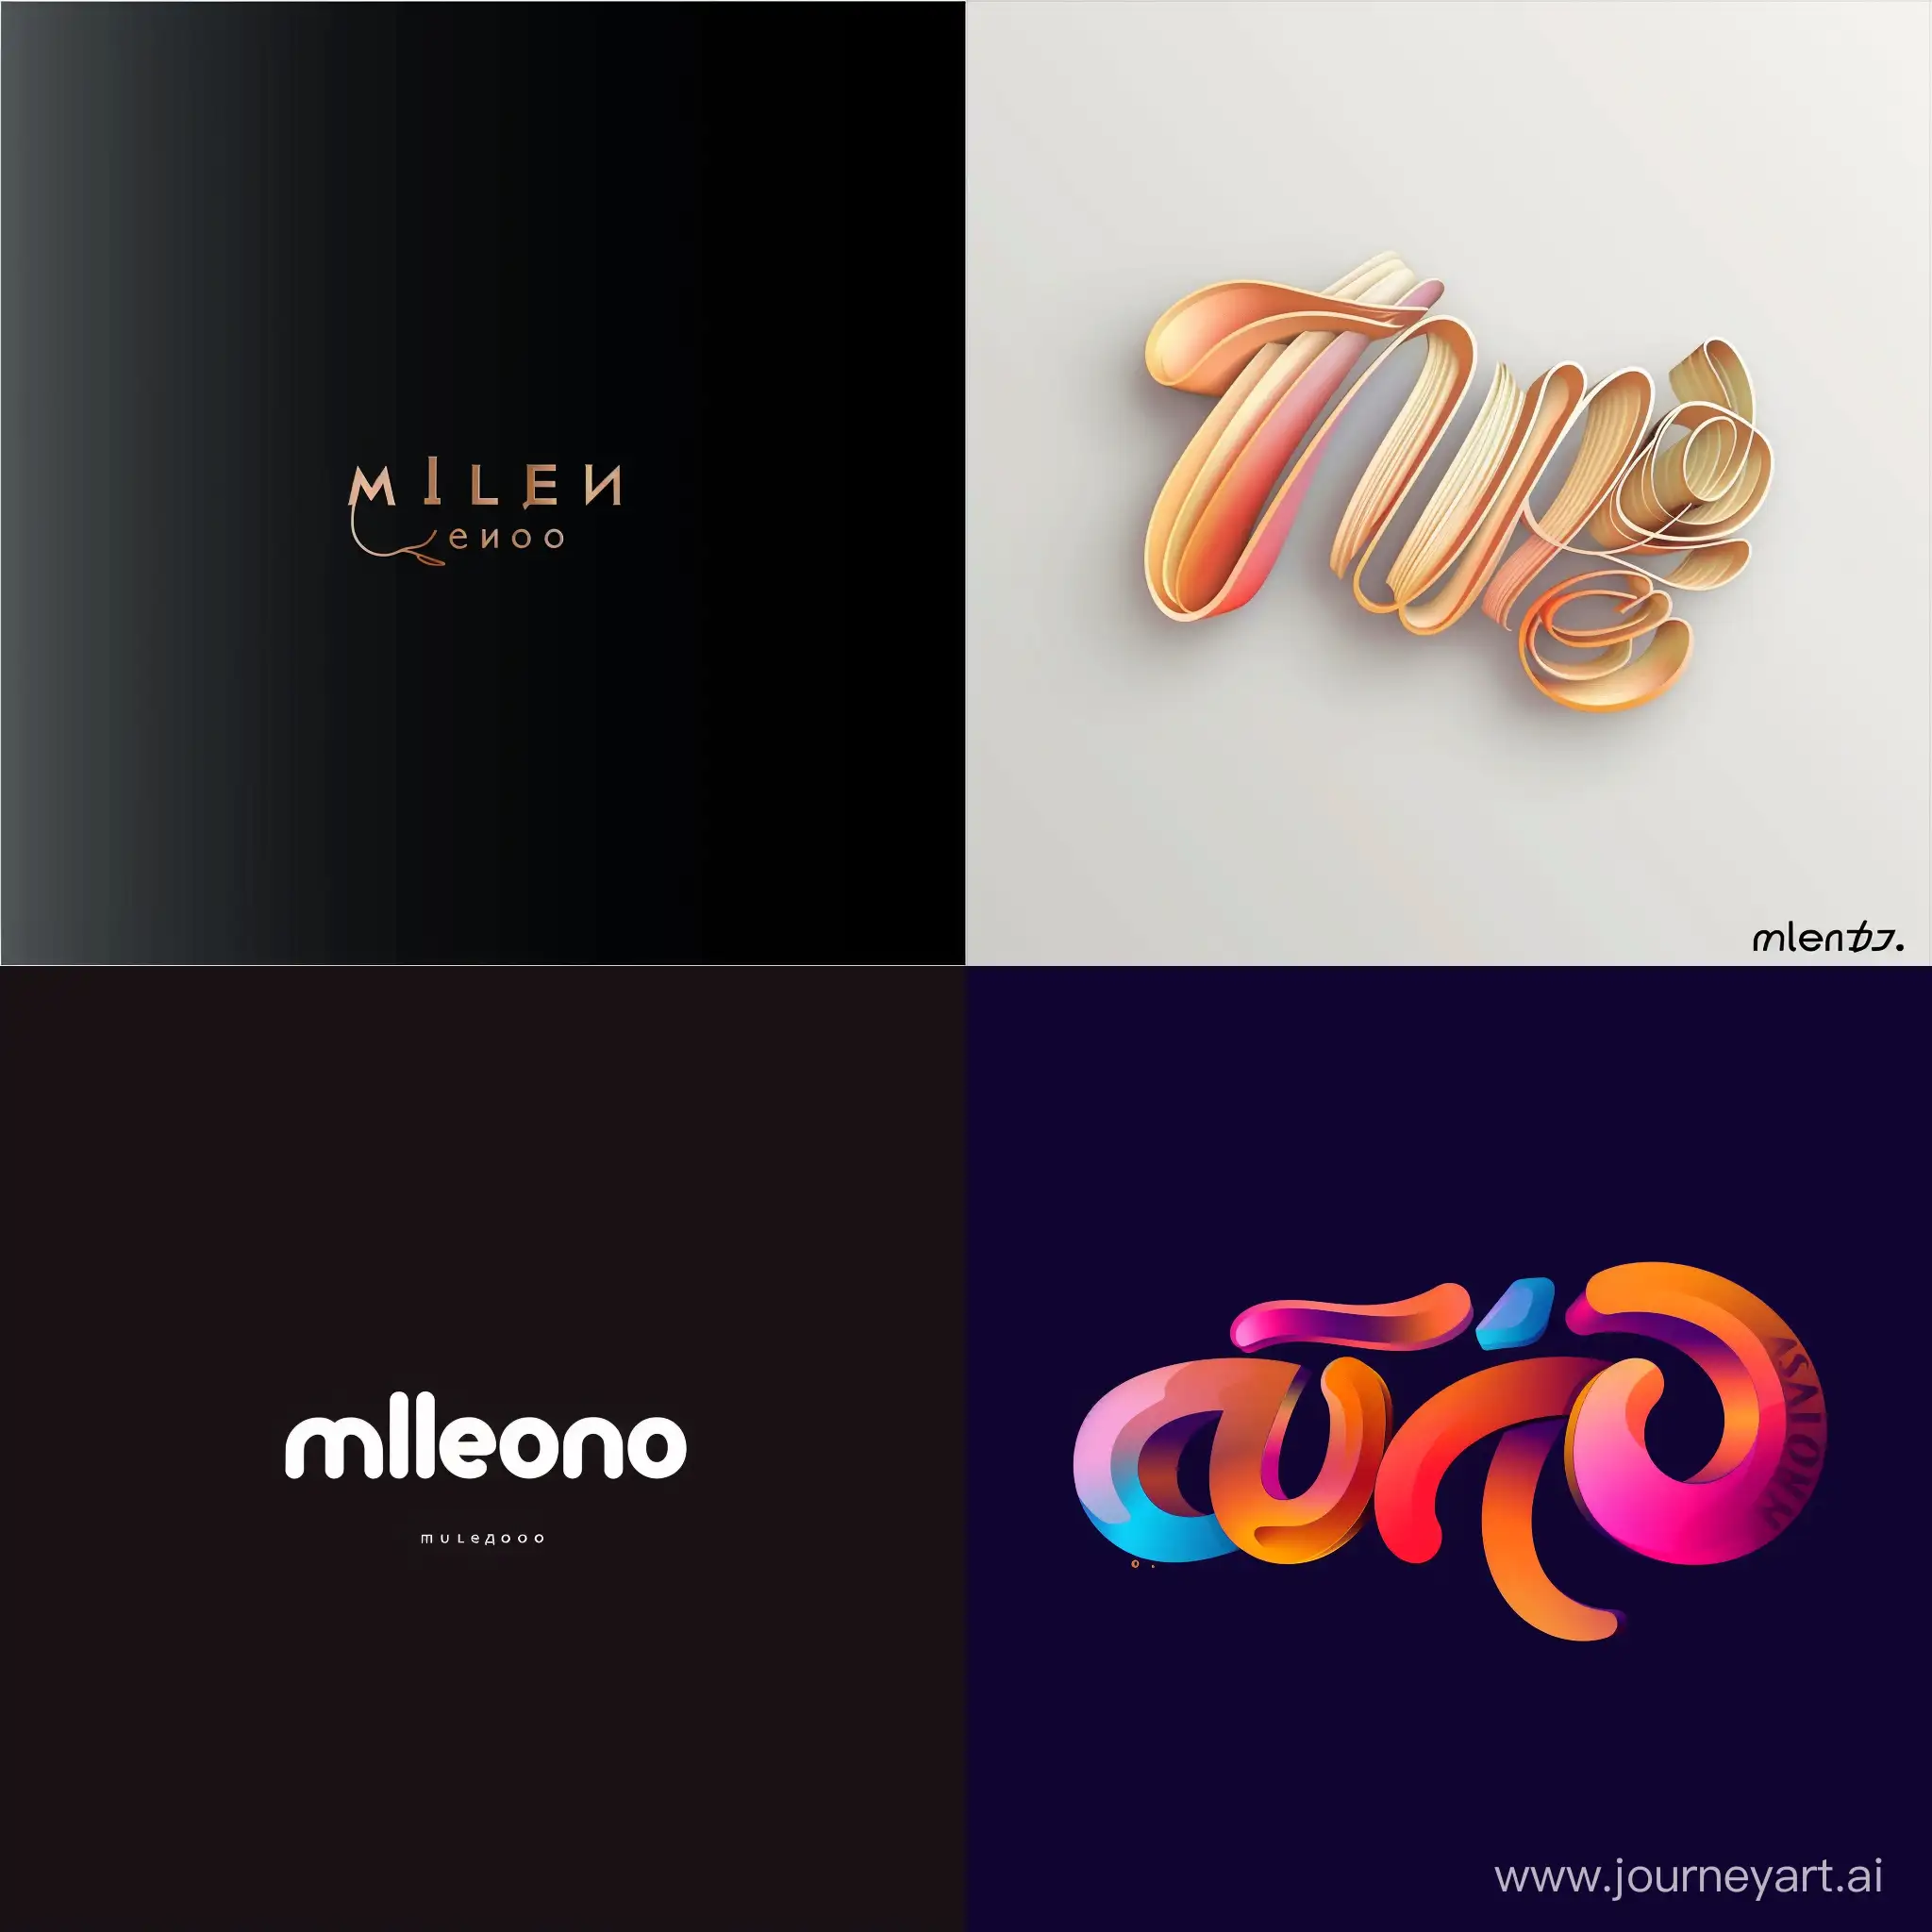 Minimalistic-Word-Logo-with-Modern-Styling-and-Elegant-Effects-on-Letters